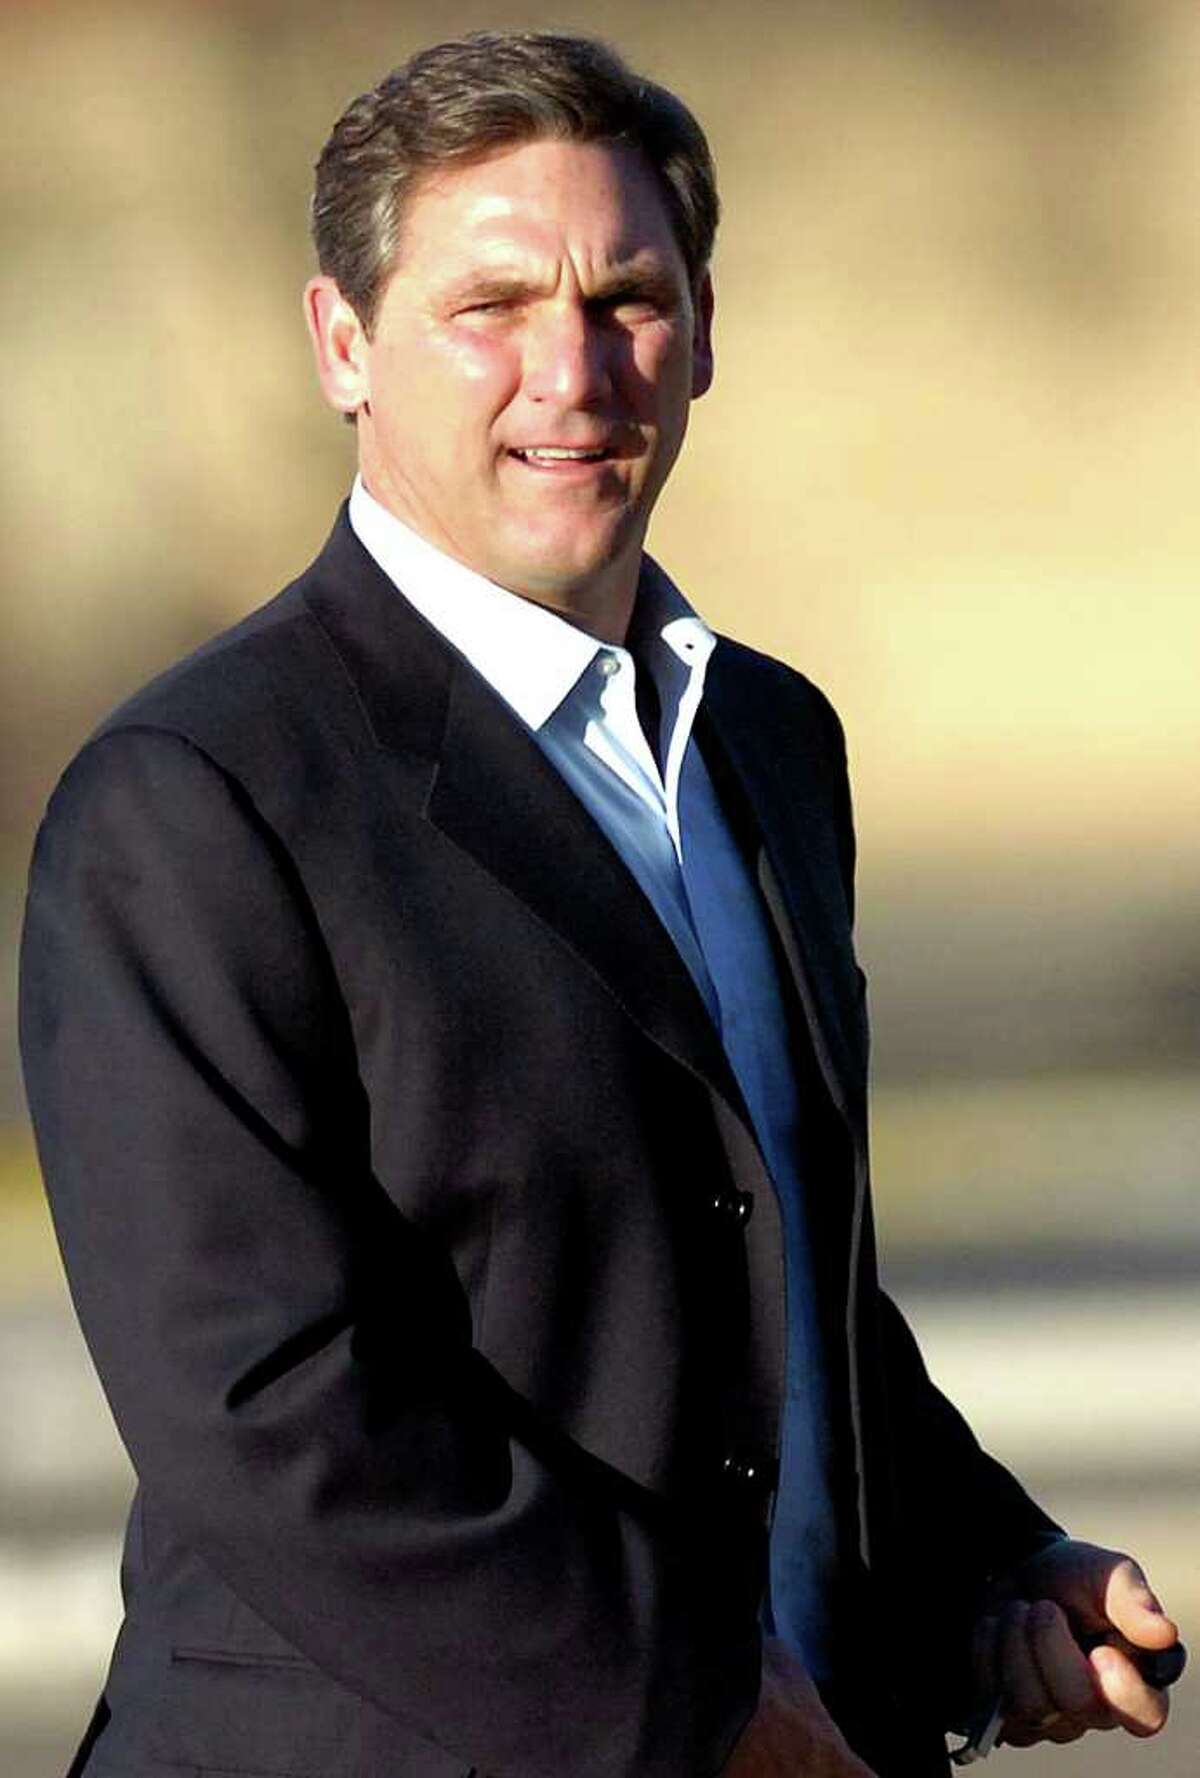 FILE - In this March 13, 2011, file photo, college football analyst Craig James is seen in Lubbock, Texas. James, who starred as a tailback at Southern Methodist University and with the New England Patriots in the 1980s, announced Monday, Dec. 19, 2011 he was running for the U.S. Senate as a Republican from Texas, a GOP fundraiser said. James would be running for the 2012 Senate seat being vacated by retiring Republican Kay Bailey Hutchison. (AP Photo/Geoffrey McAllister, File)